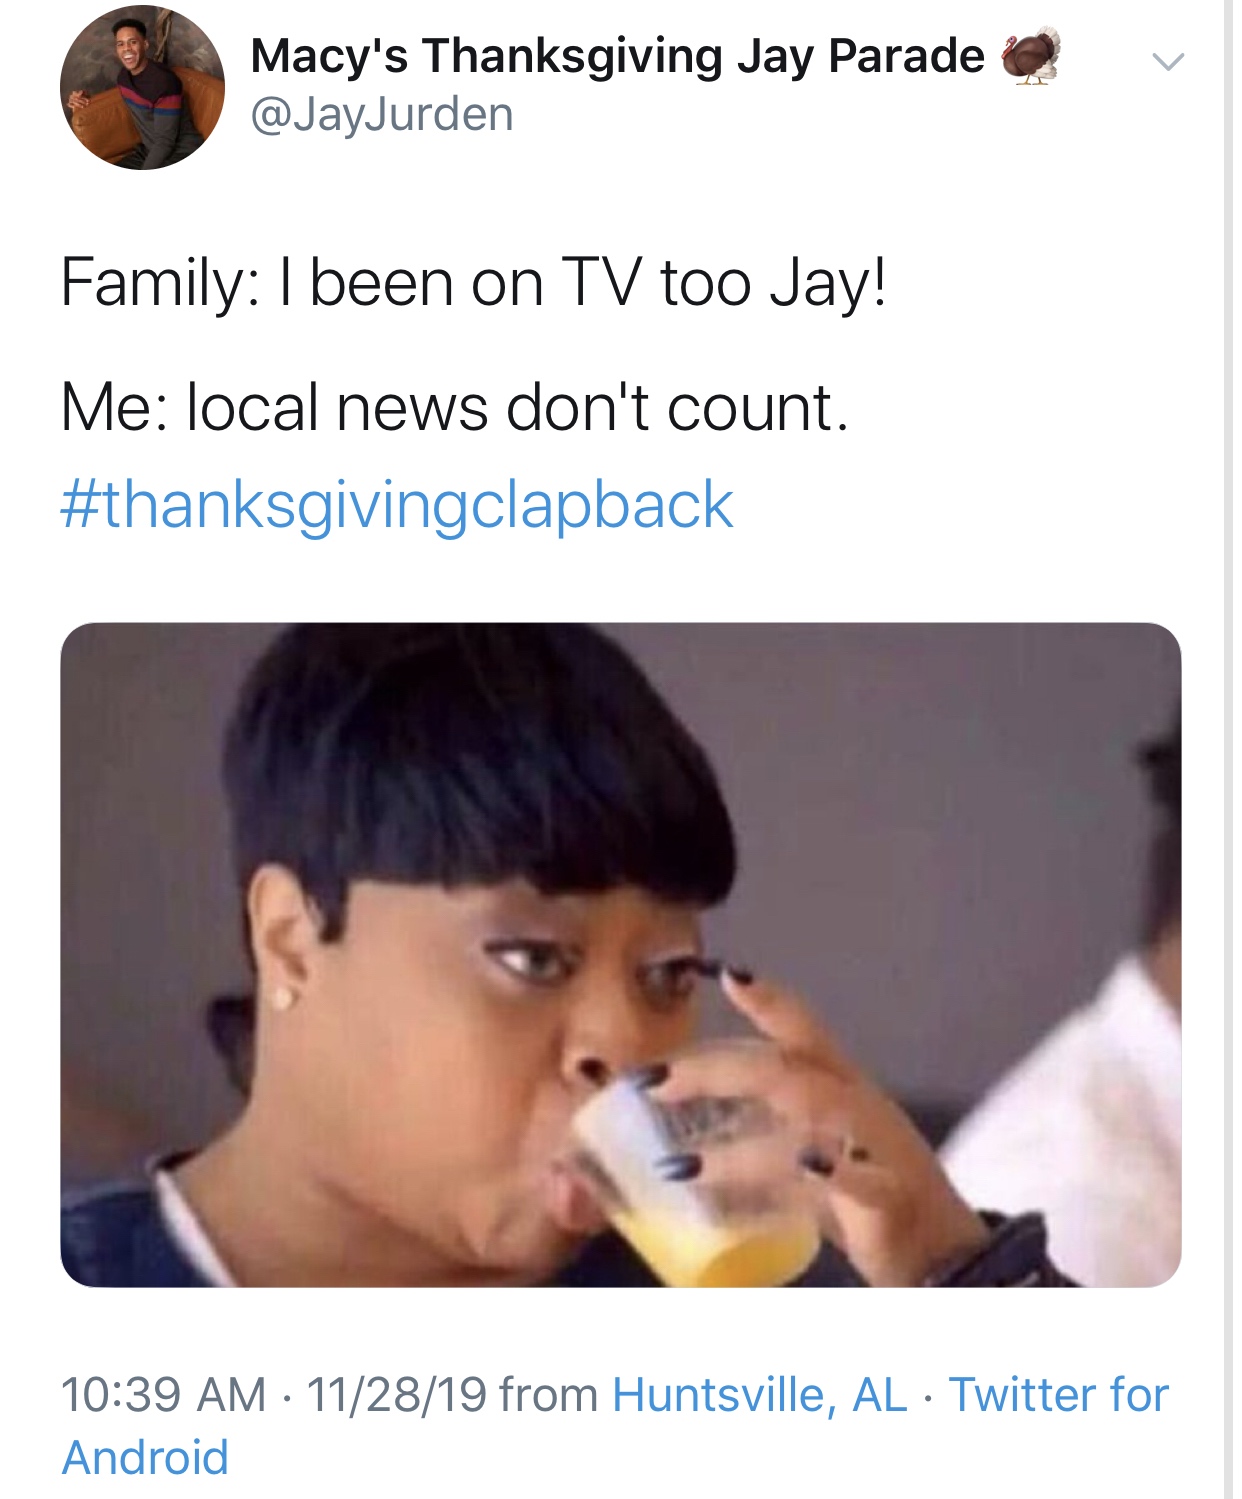 thanksgiving clapback memes - Macy's Thanksgiving Jay Parade Family I been on Tv too Jay! Me local news don't count. 112819 from Huntsville, Al Twitter for Android